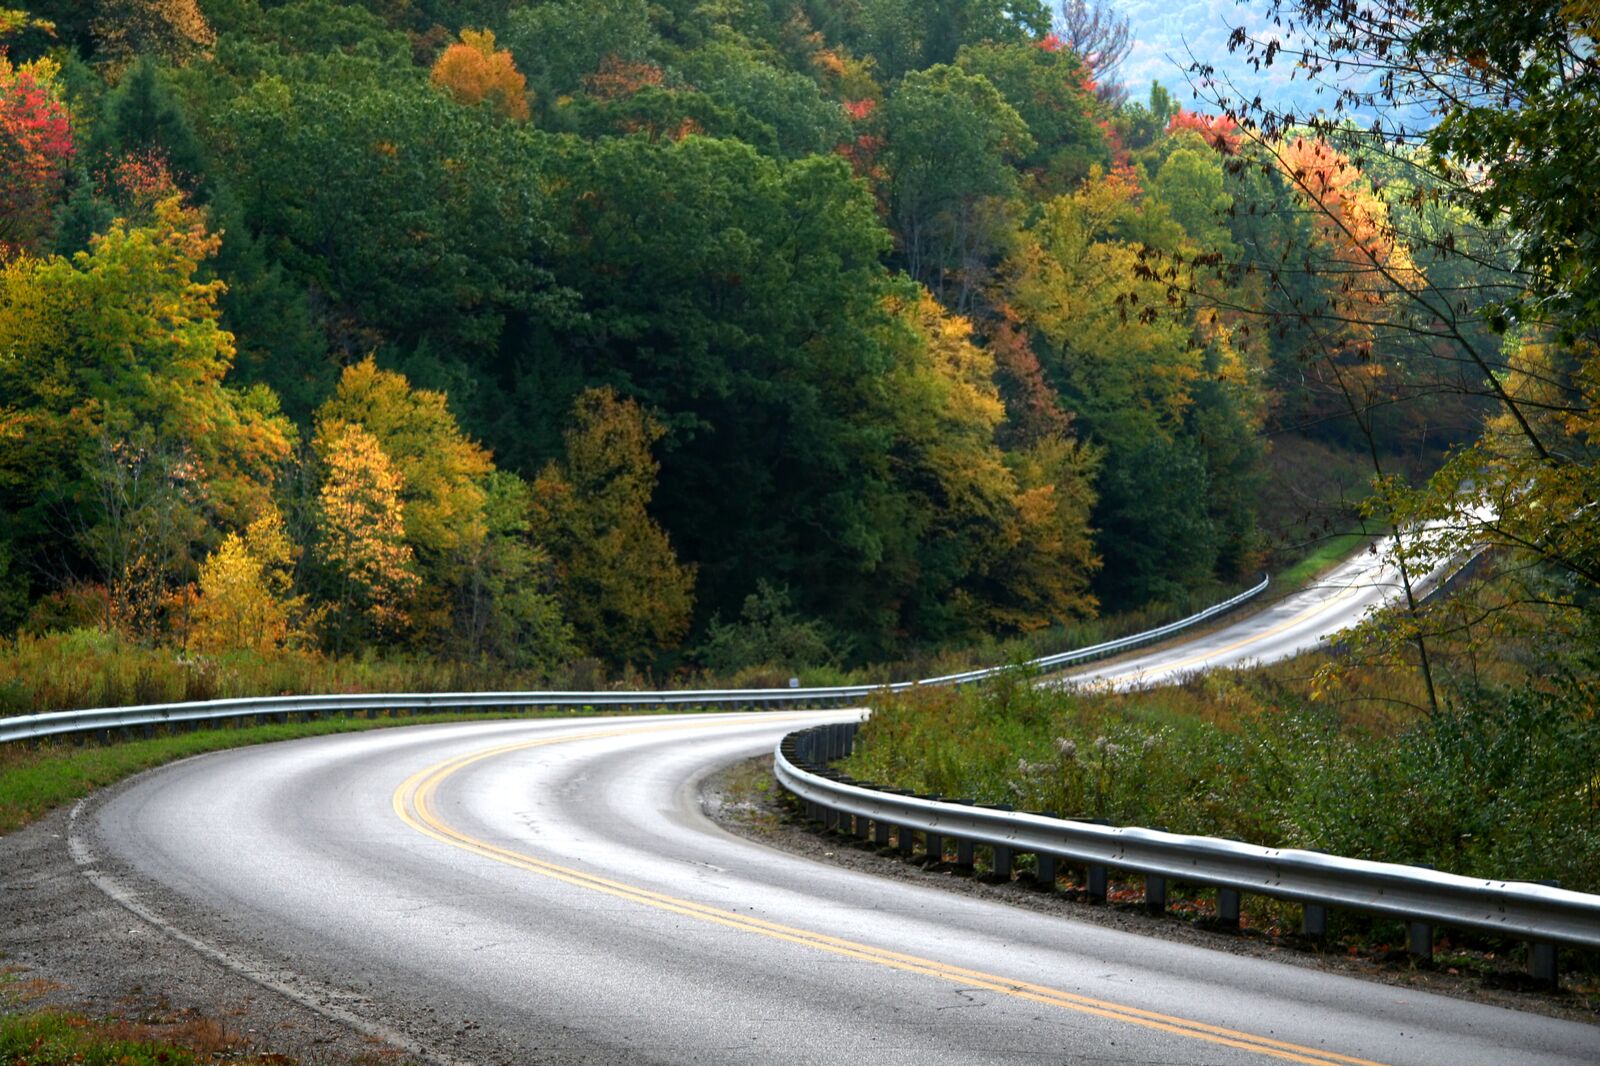 steepest highway grades in the us - pennsylvania 